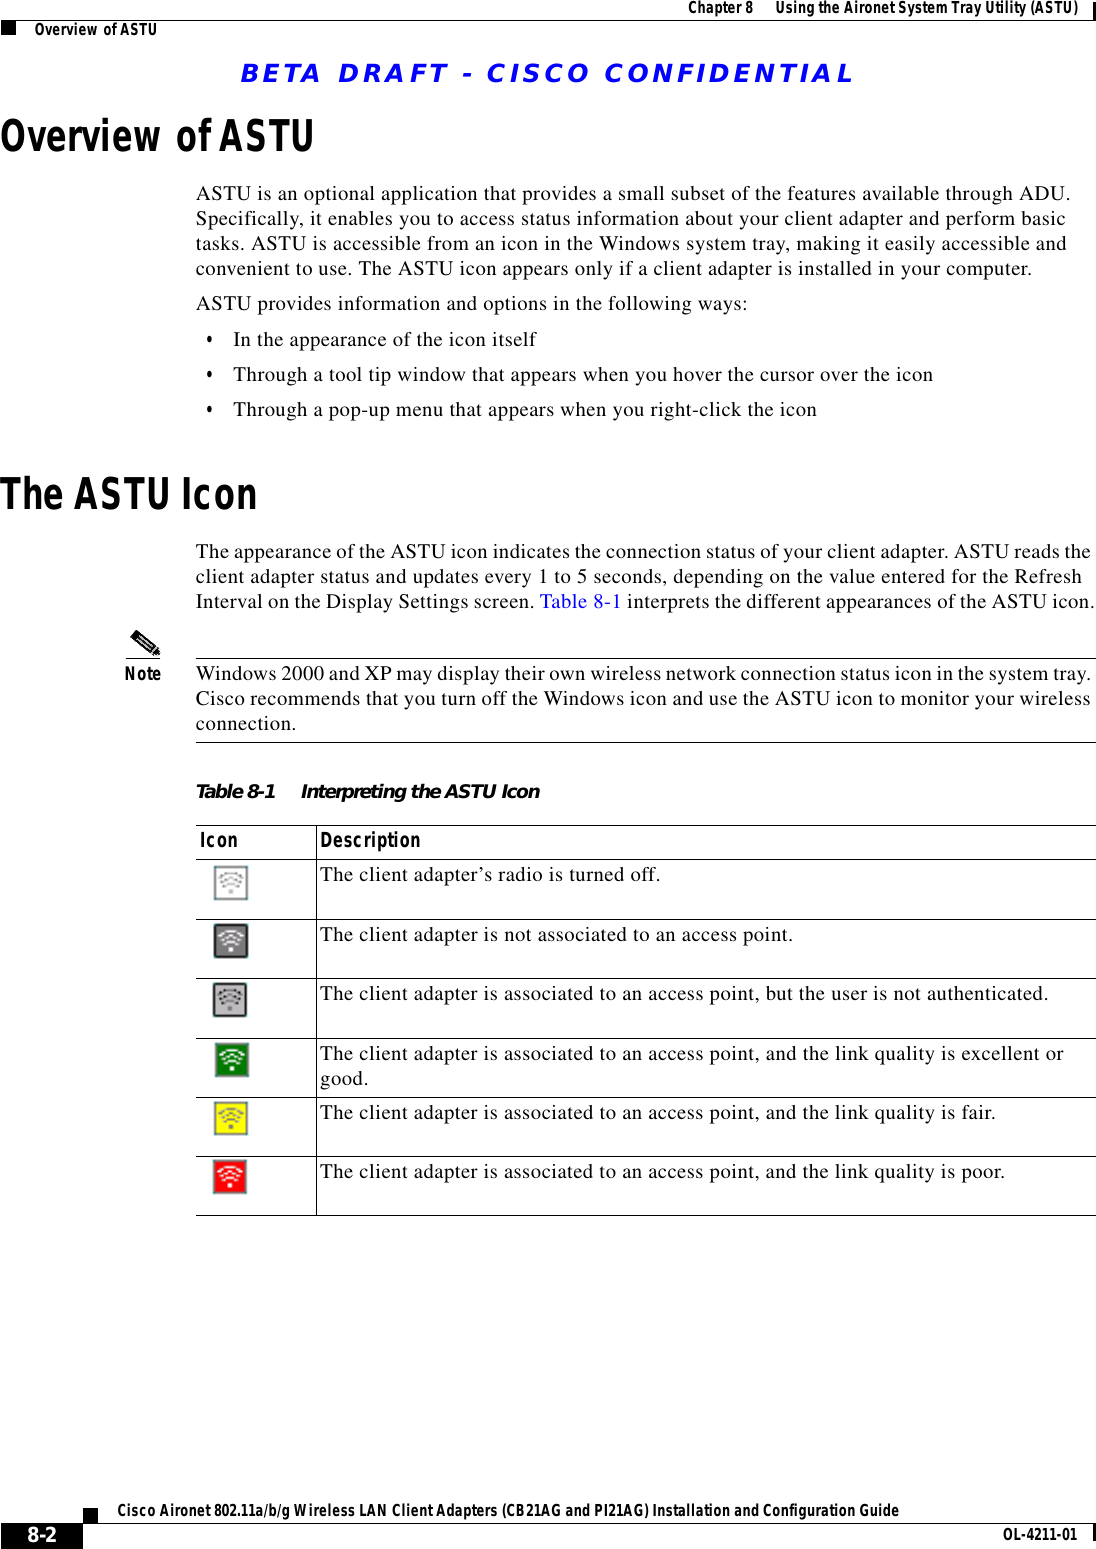 BETA DRAFT - CISCO CONFIDENTIAL8-2Cisco Aironet 802.11a/b/g Wireless LAN Client Adapters (CB21AG and PI21AG) Installation and Configuration Guide OL-4211-01Chapter 8      Using the Aironet System Tray Utility (ASTU)Overview of ASTUOverview of ASTUASTU is an optional application that provides a small subset of the features available through ADU. Specifically, it enables you to access status information about your client adapter and perform basic tasks. ASTU is accessible from an icon in the Windows system tray, making it easily accessible and convenient to use. The ASTU icon appears only if a client adapter is installed in your computer.ASTU provides information and options in the following ways:•In the appearance of the icon itself•Through a tool tip window that appears when you hover the cursor over the icon•Through a pop-up menu that appears when you right-click the iconThe ASTU IconThe appearance of the ASTU icon indicates the connection status of your client adapter. ASTU reads the client adapter status and updates every 1 to 5 seconds, depending on the value entered for the Refresh Interval on the Display Settings screen. Table 8-1 interprets the different appearances of the ASTU icon.Note Windows 2000 and XP may display their own wireless network connection status icon in the system tray. Cisco recommends that you turn off the Windows icon and use the ASTU icon to monitor your wireless connection.Table 8-1 Interpreting the ASTU IconIcon DescriptionThe client adapter’s radio is turned off.The client adapter is not associated to an access point.The client adapter is associated to an access point, but the user is not authenticated.The client adapter is associated to an access point, and the link quality is excellent or good.The client adapter is associated to an access point, and the link quality is fair.The client adapter is associated to an access point, and the link quality is poor.